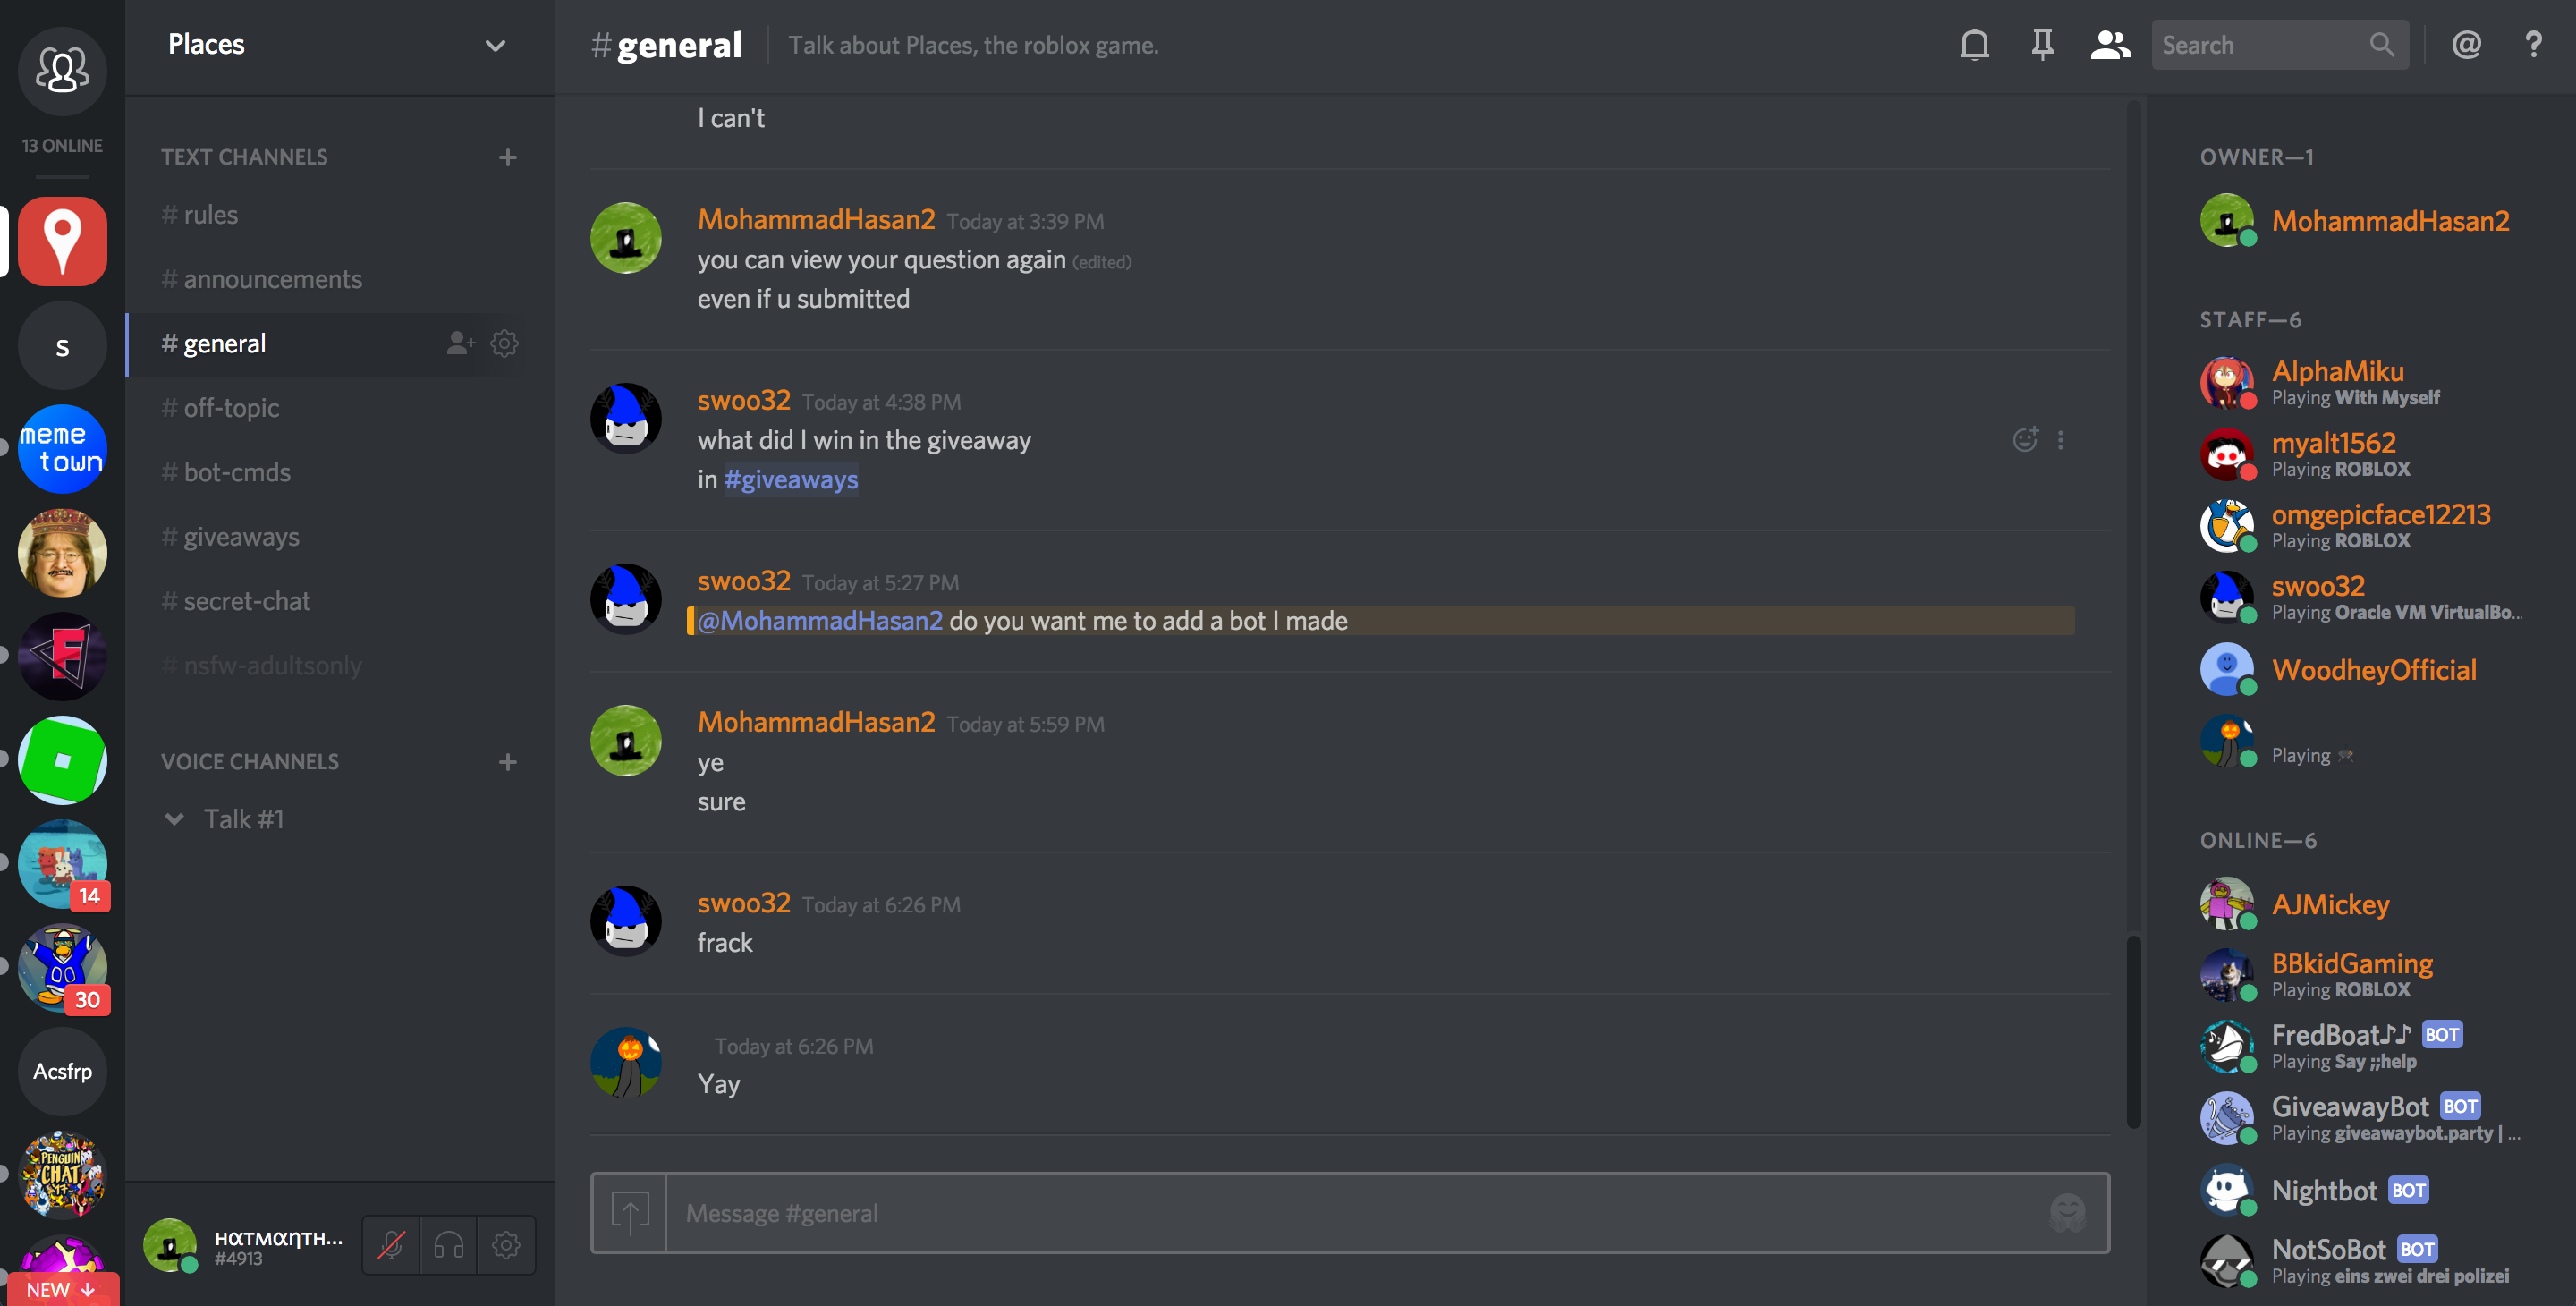 nsfw discord servers to join